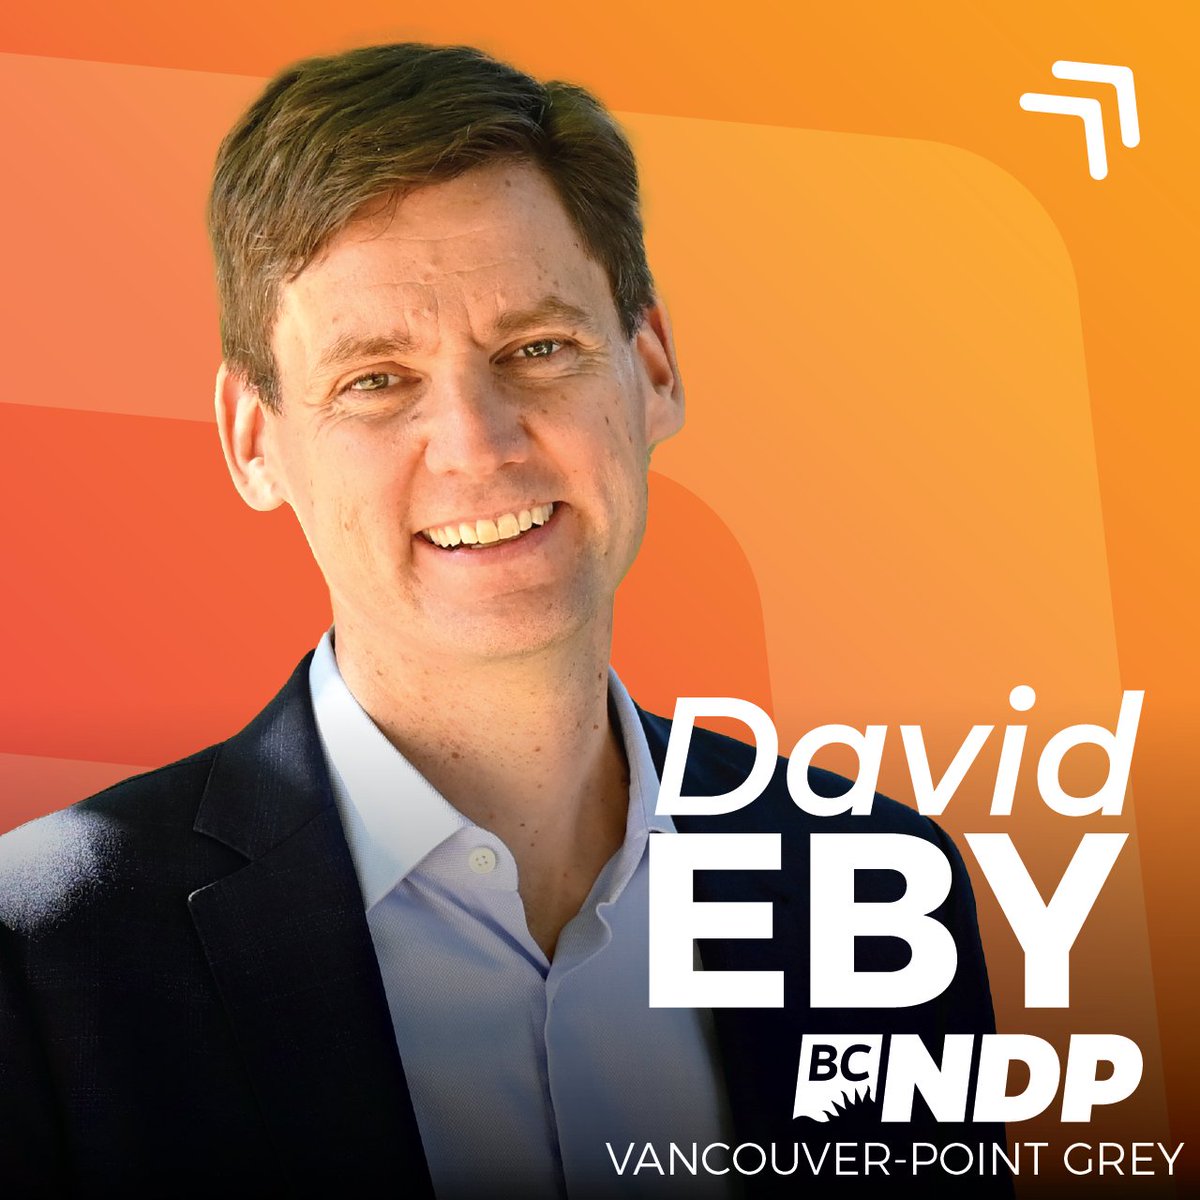 We’re delighted to welcome Premier David Eby as our BC NDP candidate in Vancouver-Point Grey. First elected in 2013 and re-elected twice, David is the former Attorney General and Minister of Housing. He's taking real action to help you so you can build a good life in BC.